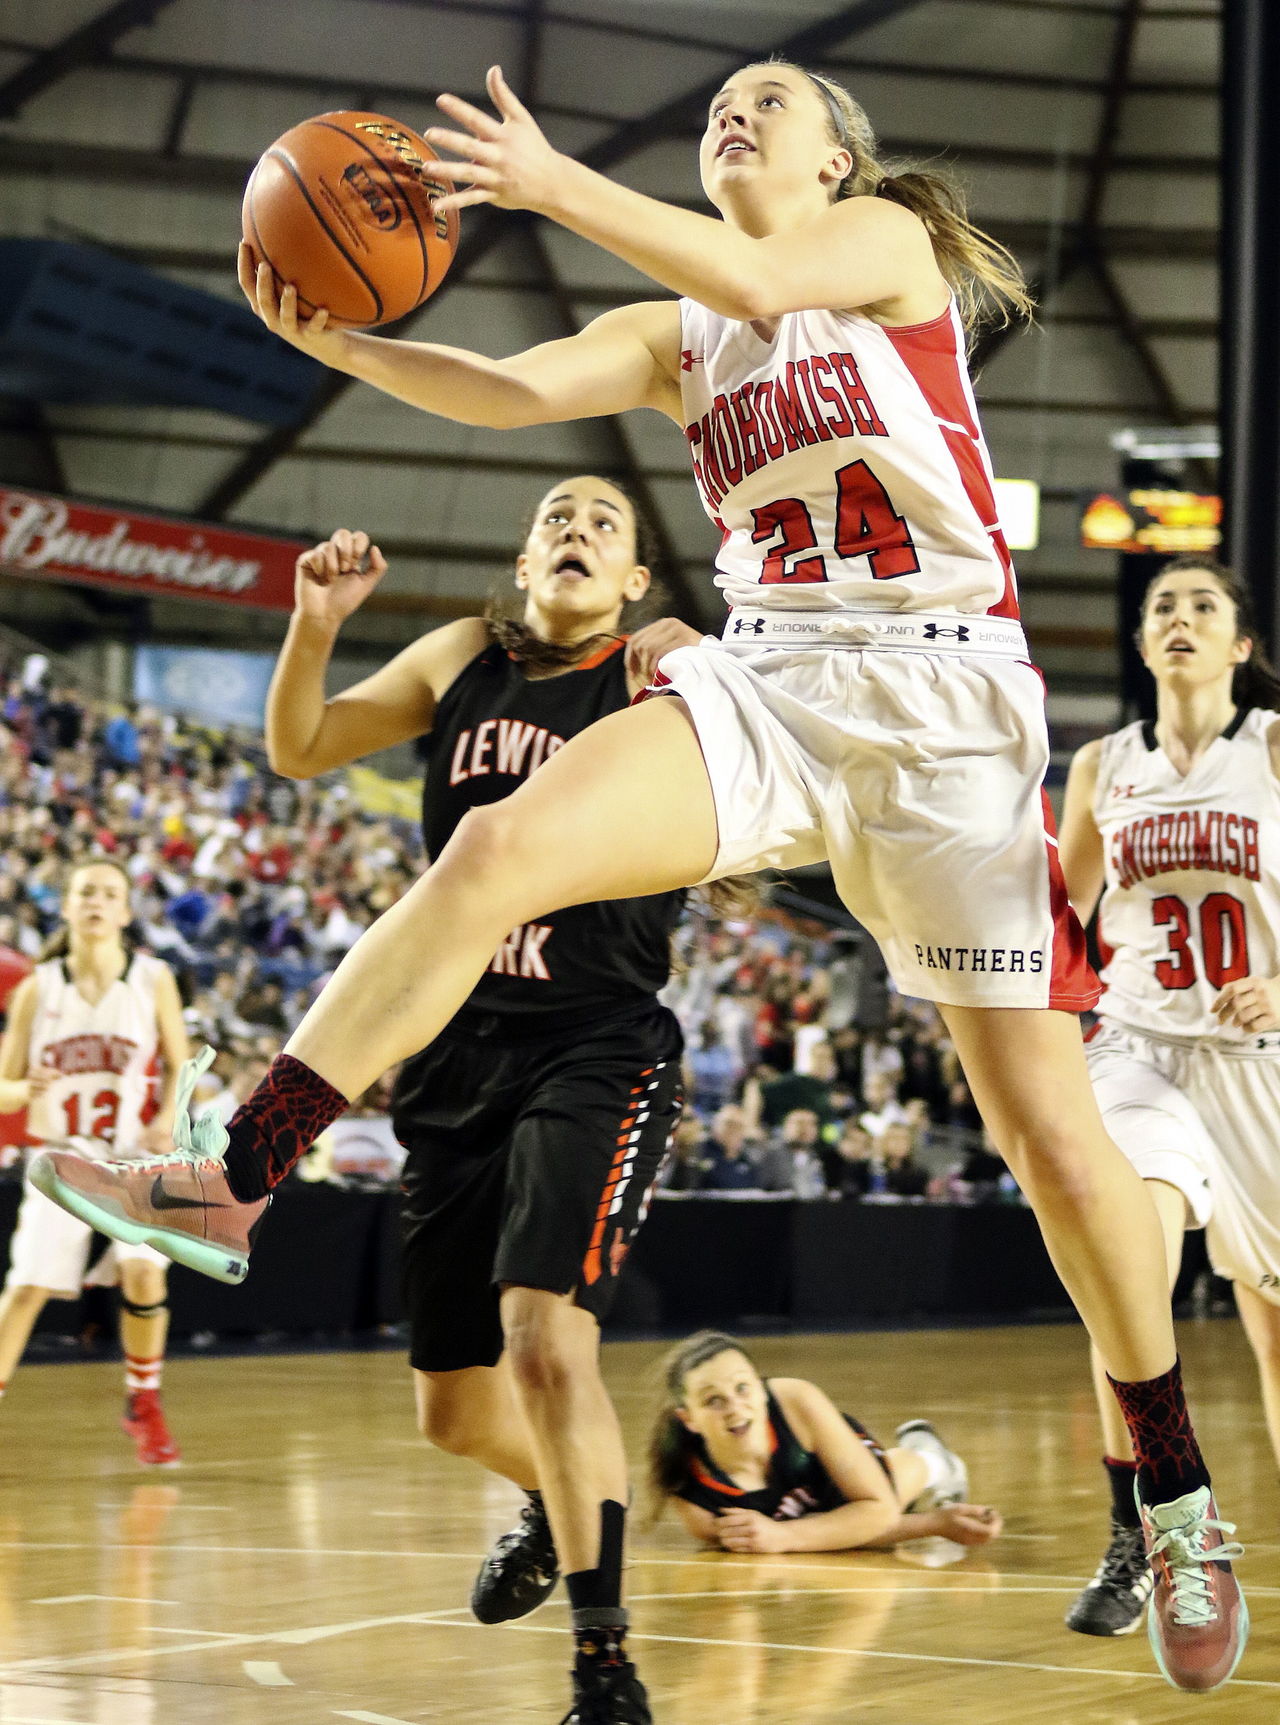 Madison Pollock of Snohomish makes a basket at the buzzer to force overtime in Friday’s 4A state quarterfinal at the Tacoma Dome.